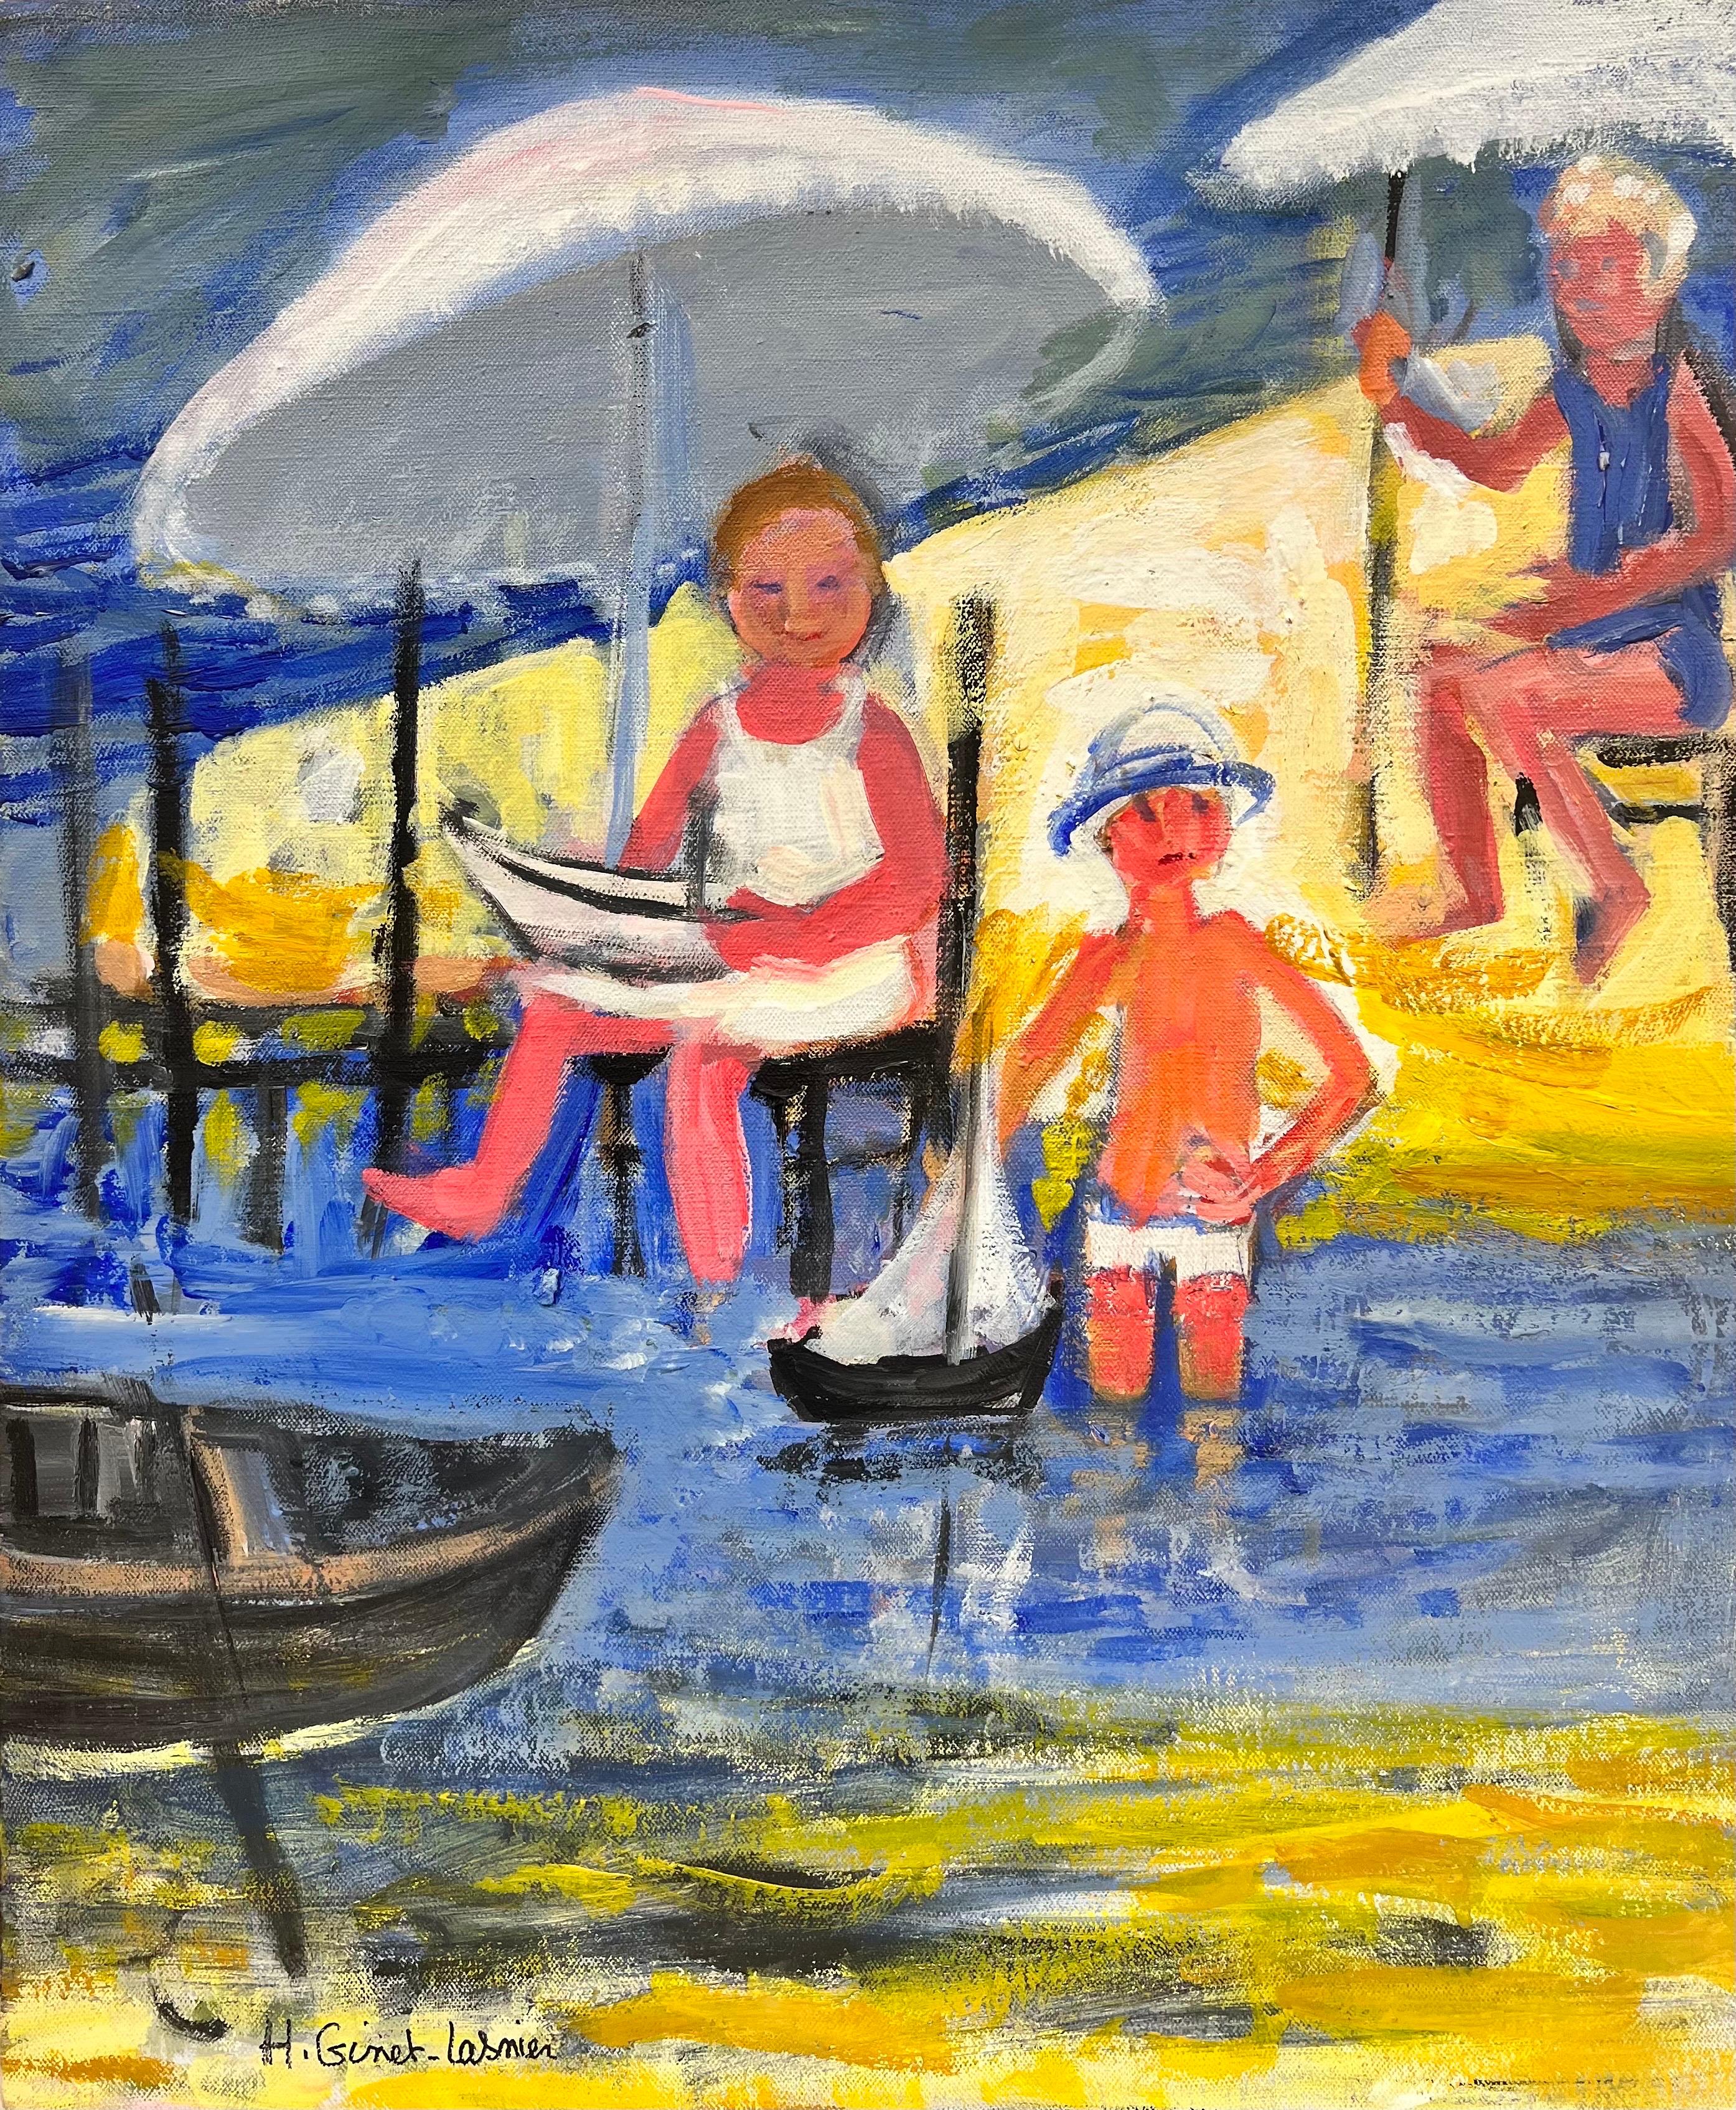 Huguette Ginet-Lasnier  Figurative Painting - Family Playing on Beach with Toy Boat French Modernist Oil Painting 